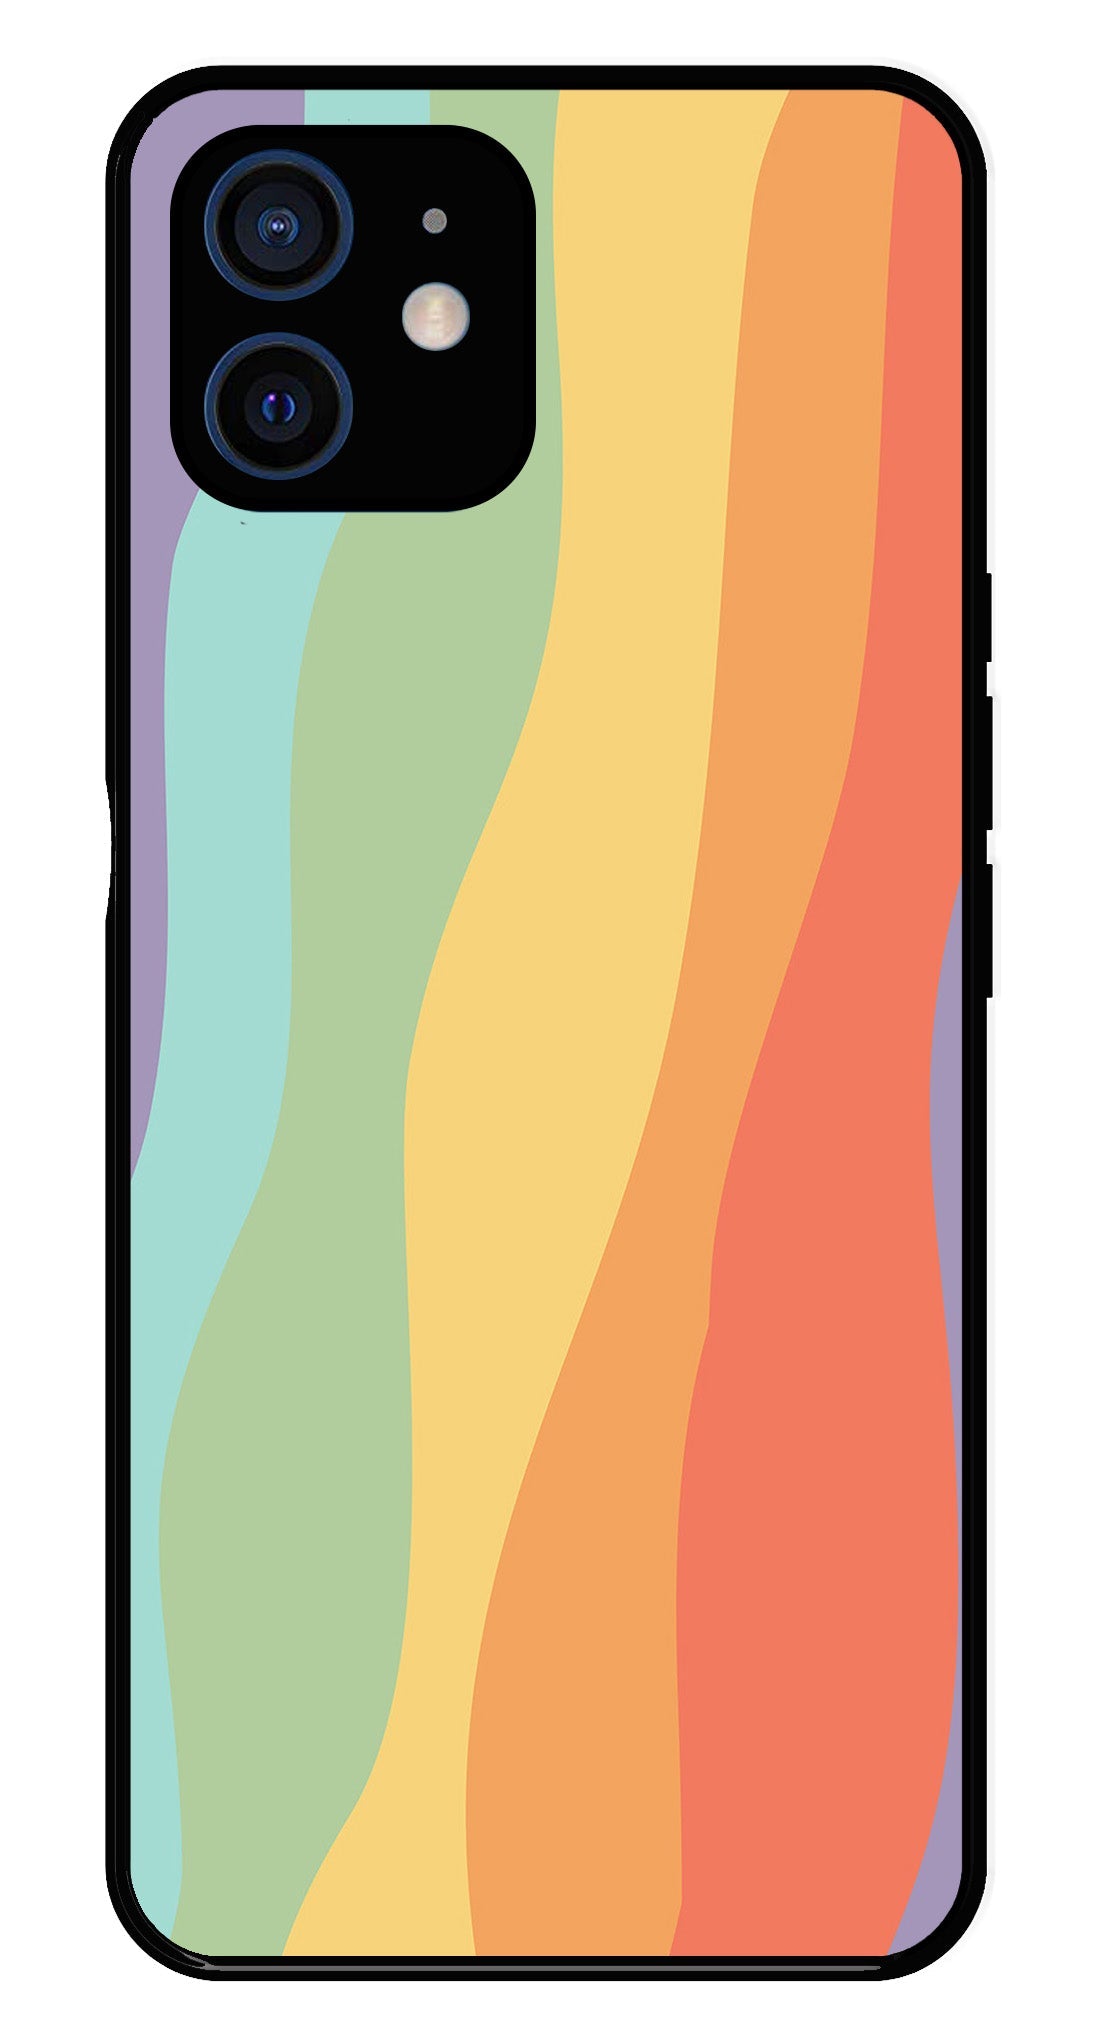 Muted Rainbow Metal Mobile Case for iPhone 12 Mini